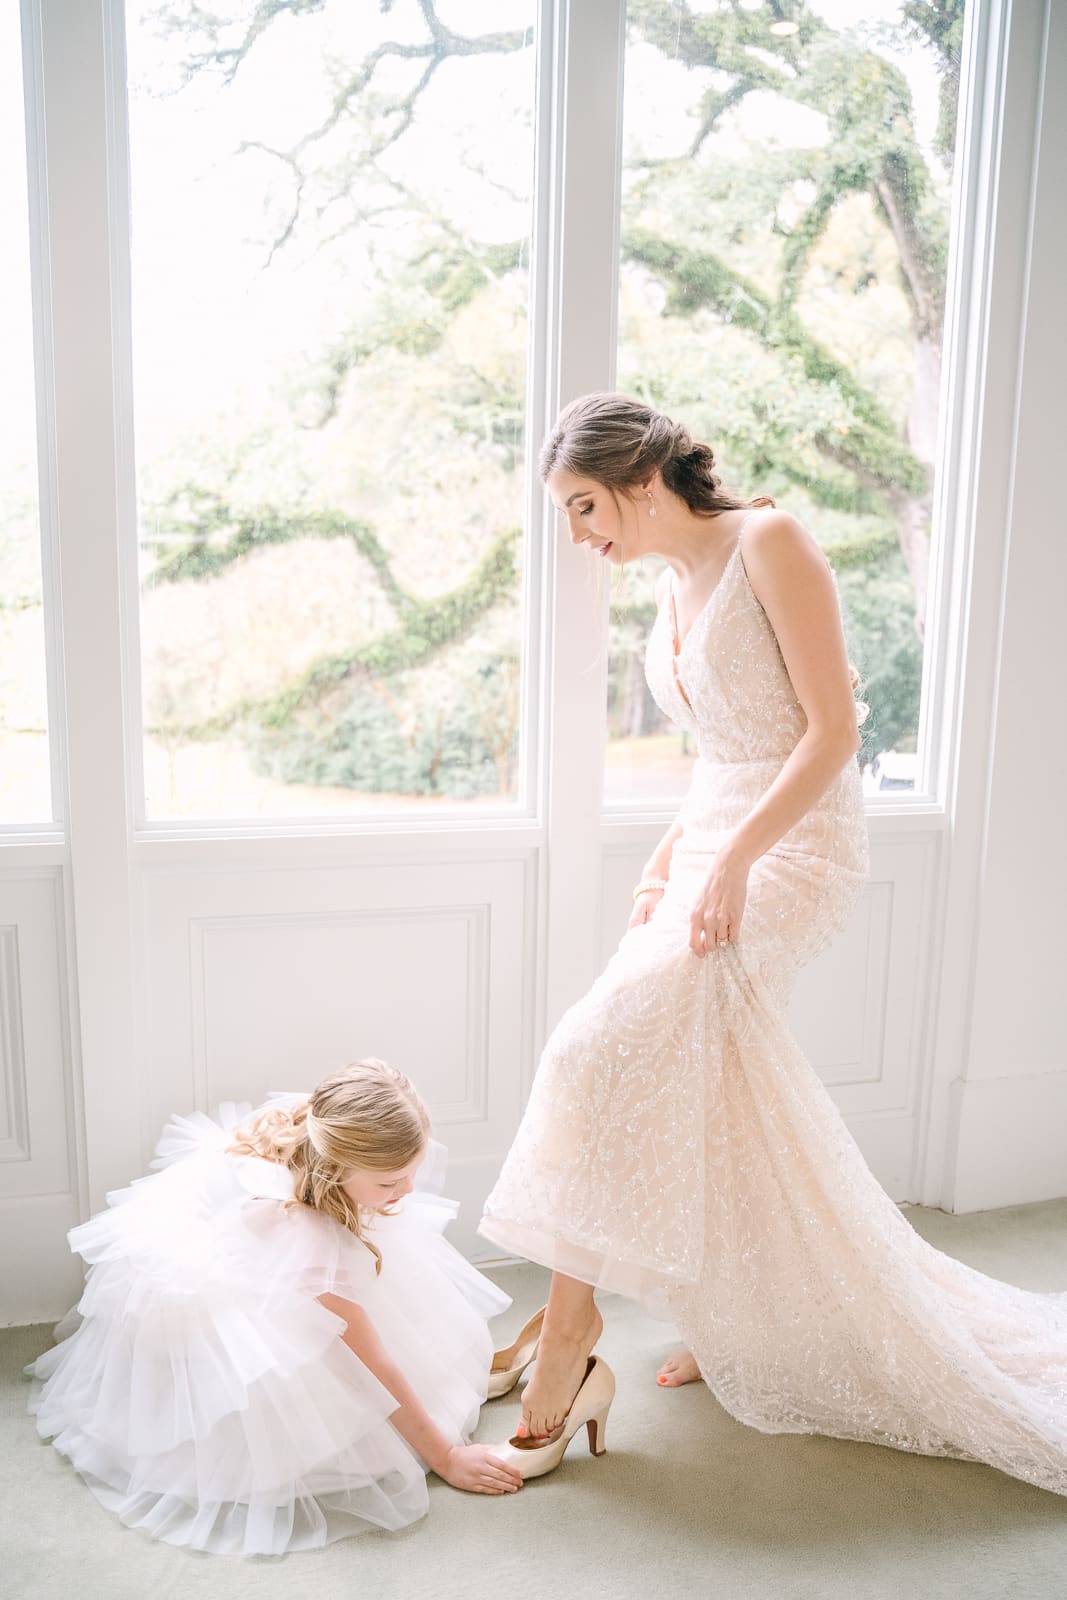 Flower girl putting brides shoes on her in Bridal room at Bragg Mitchell Mansion